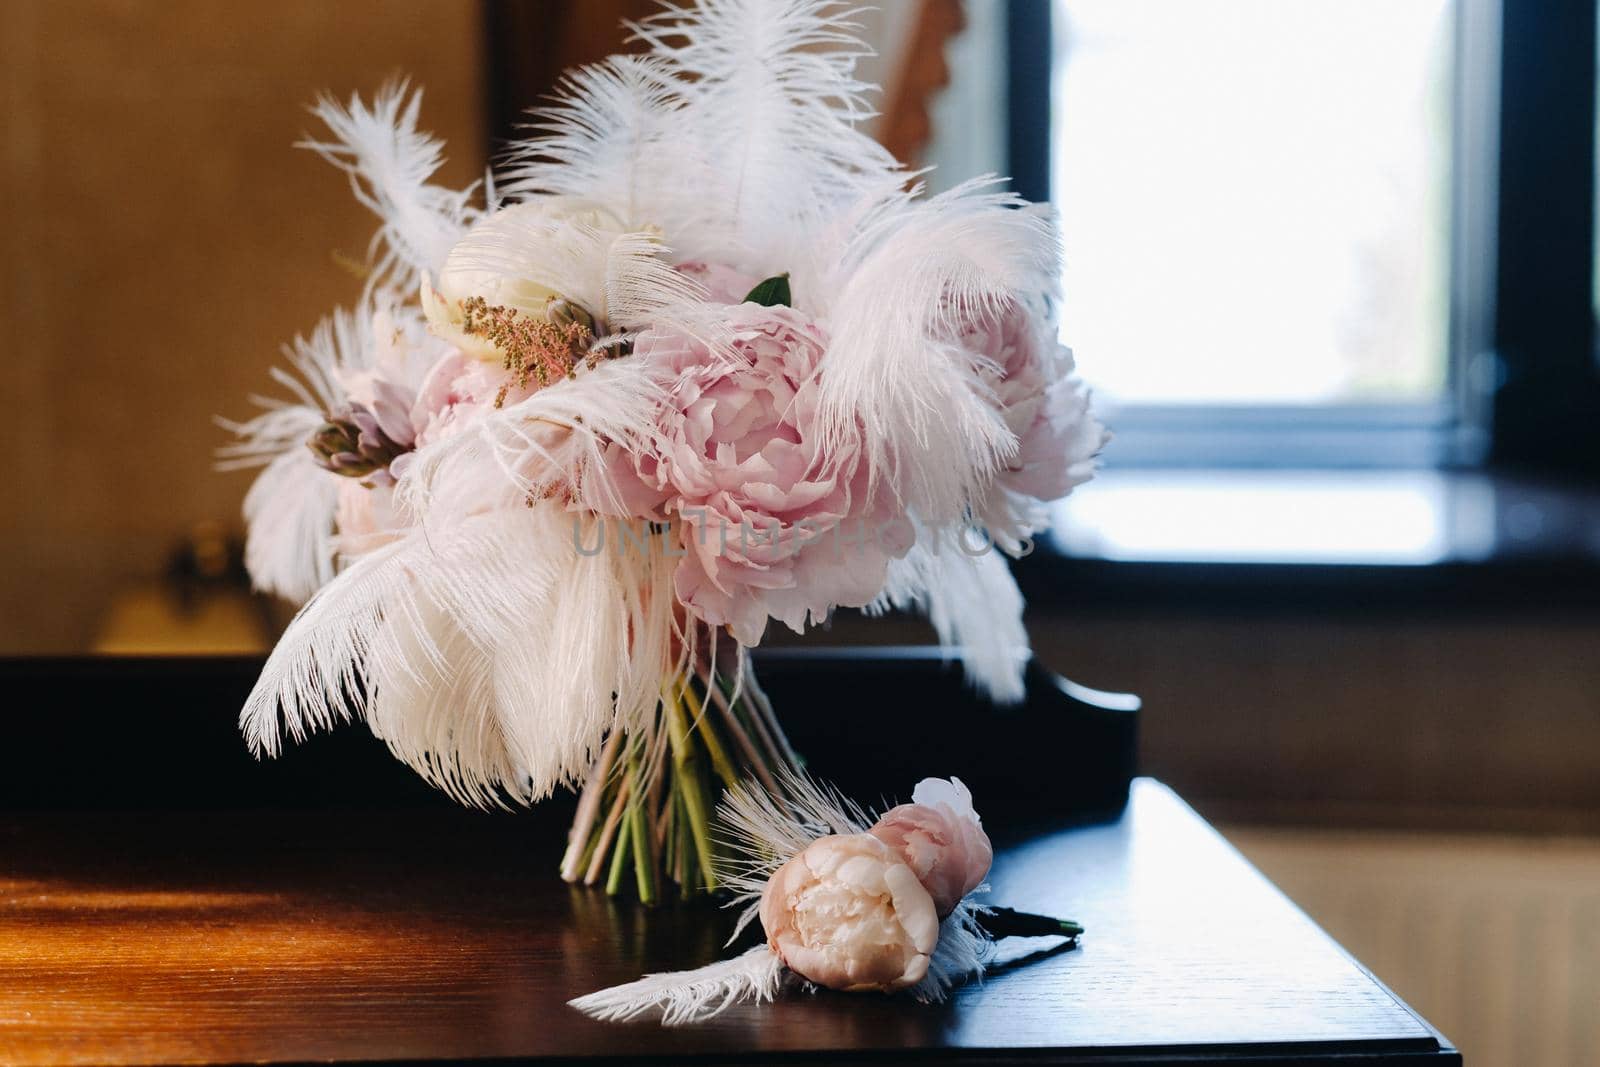 The bride's wedding bouquet of roses decorated with white feathers and a boutonniere.